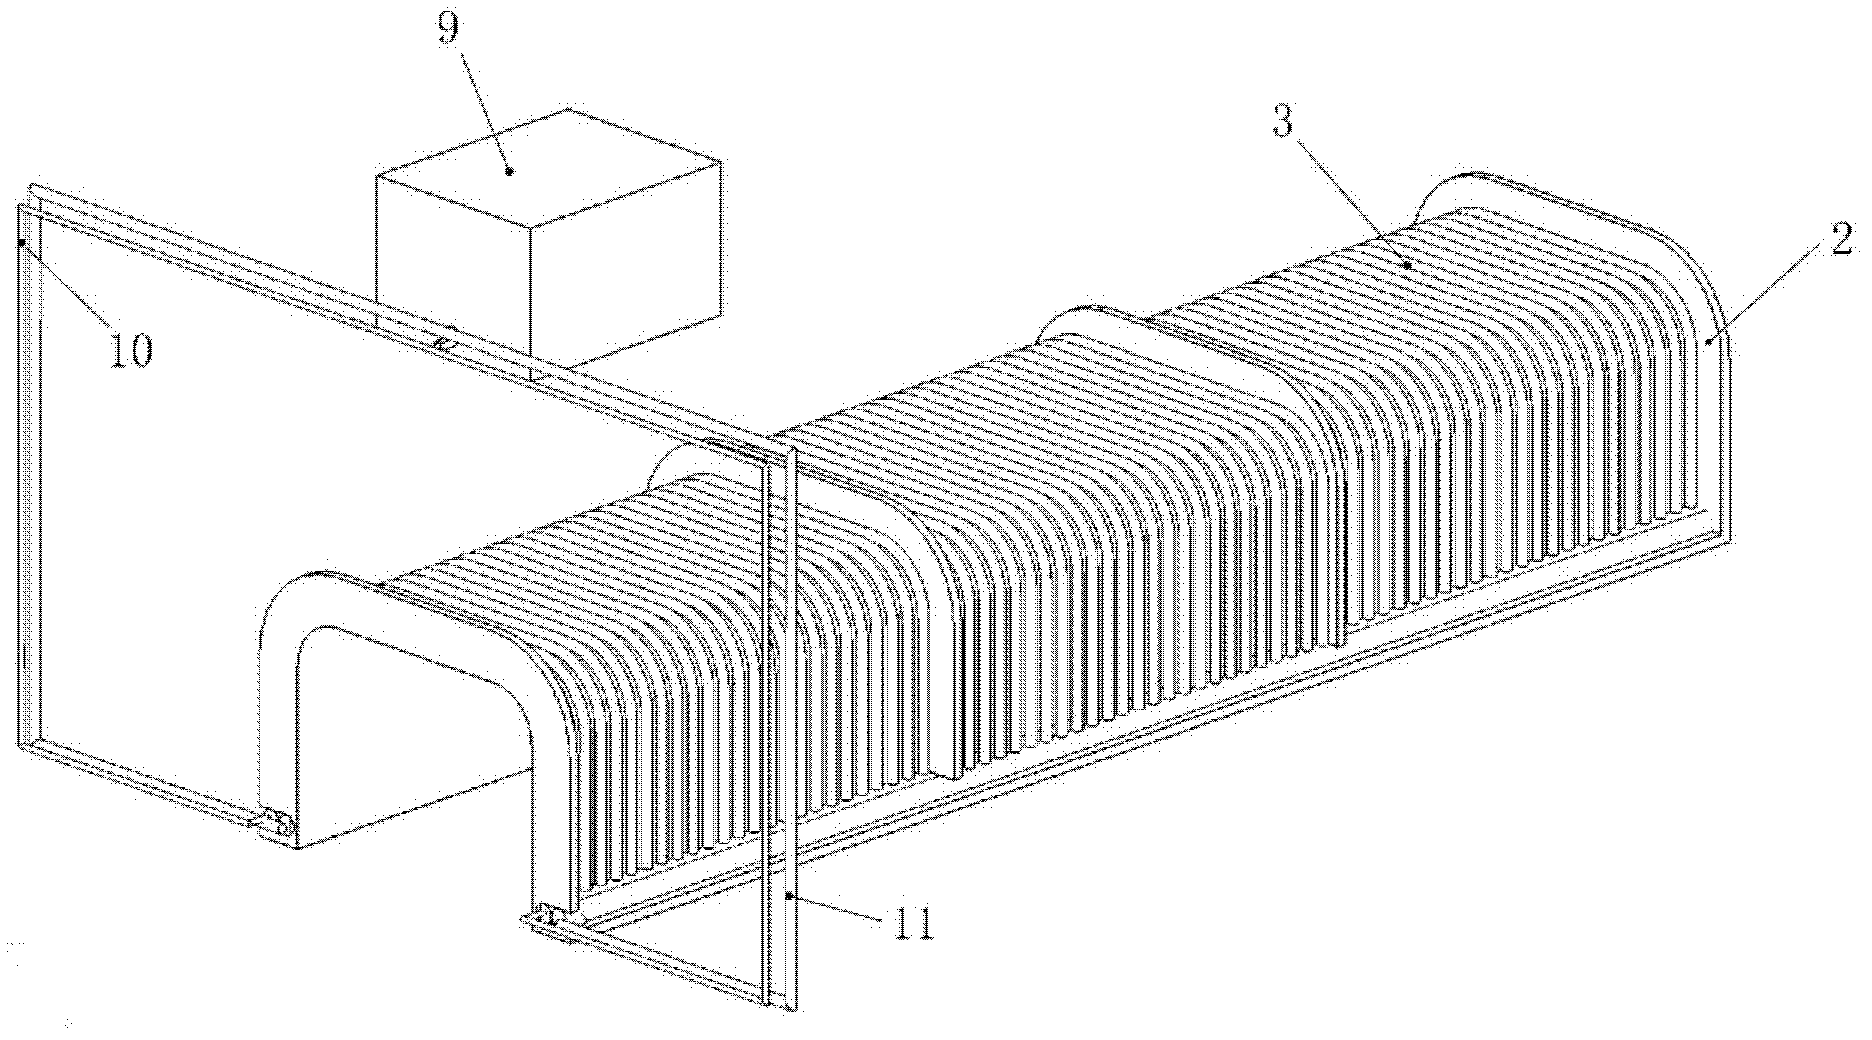 Rail destruction detection device and method based on magnetostriction and longitudinal ultrasonic guided wave